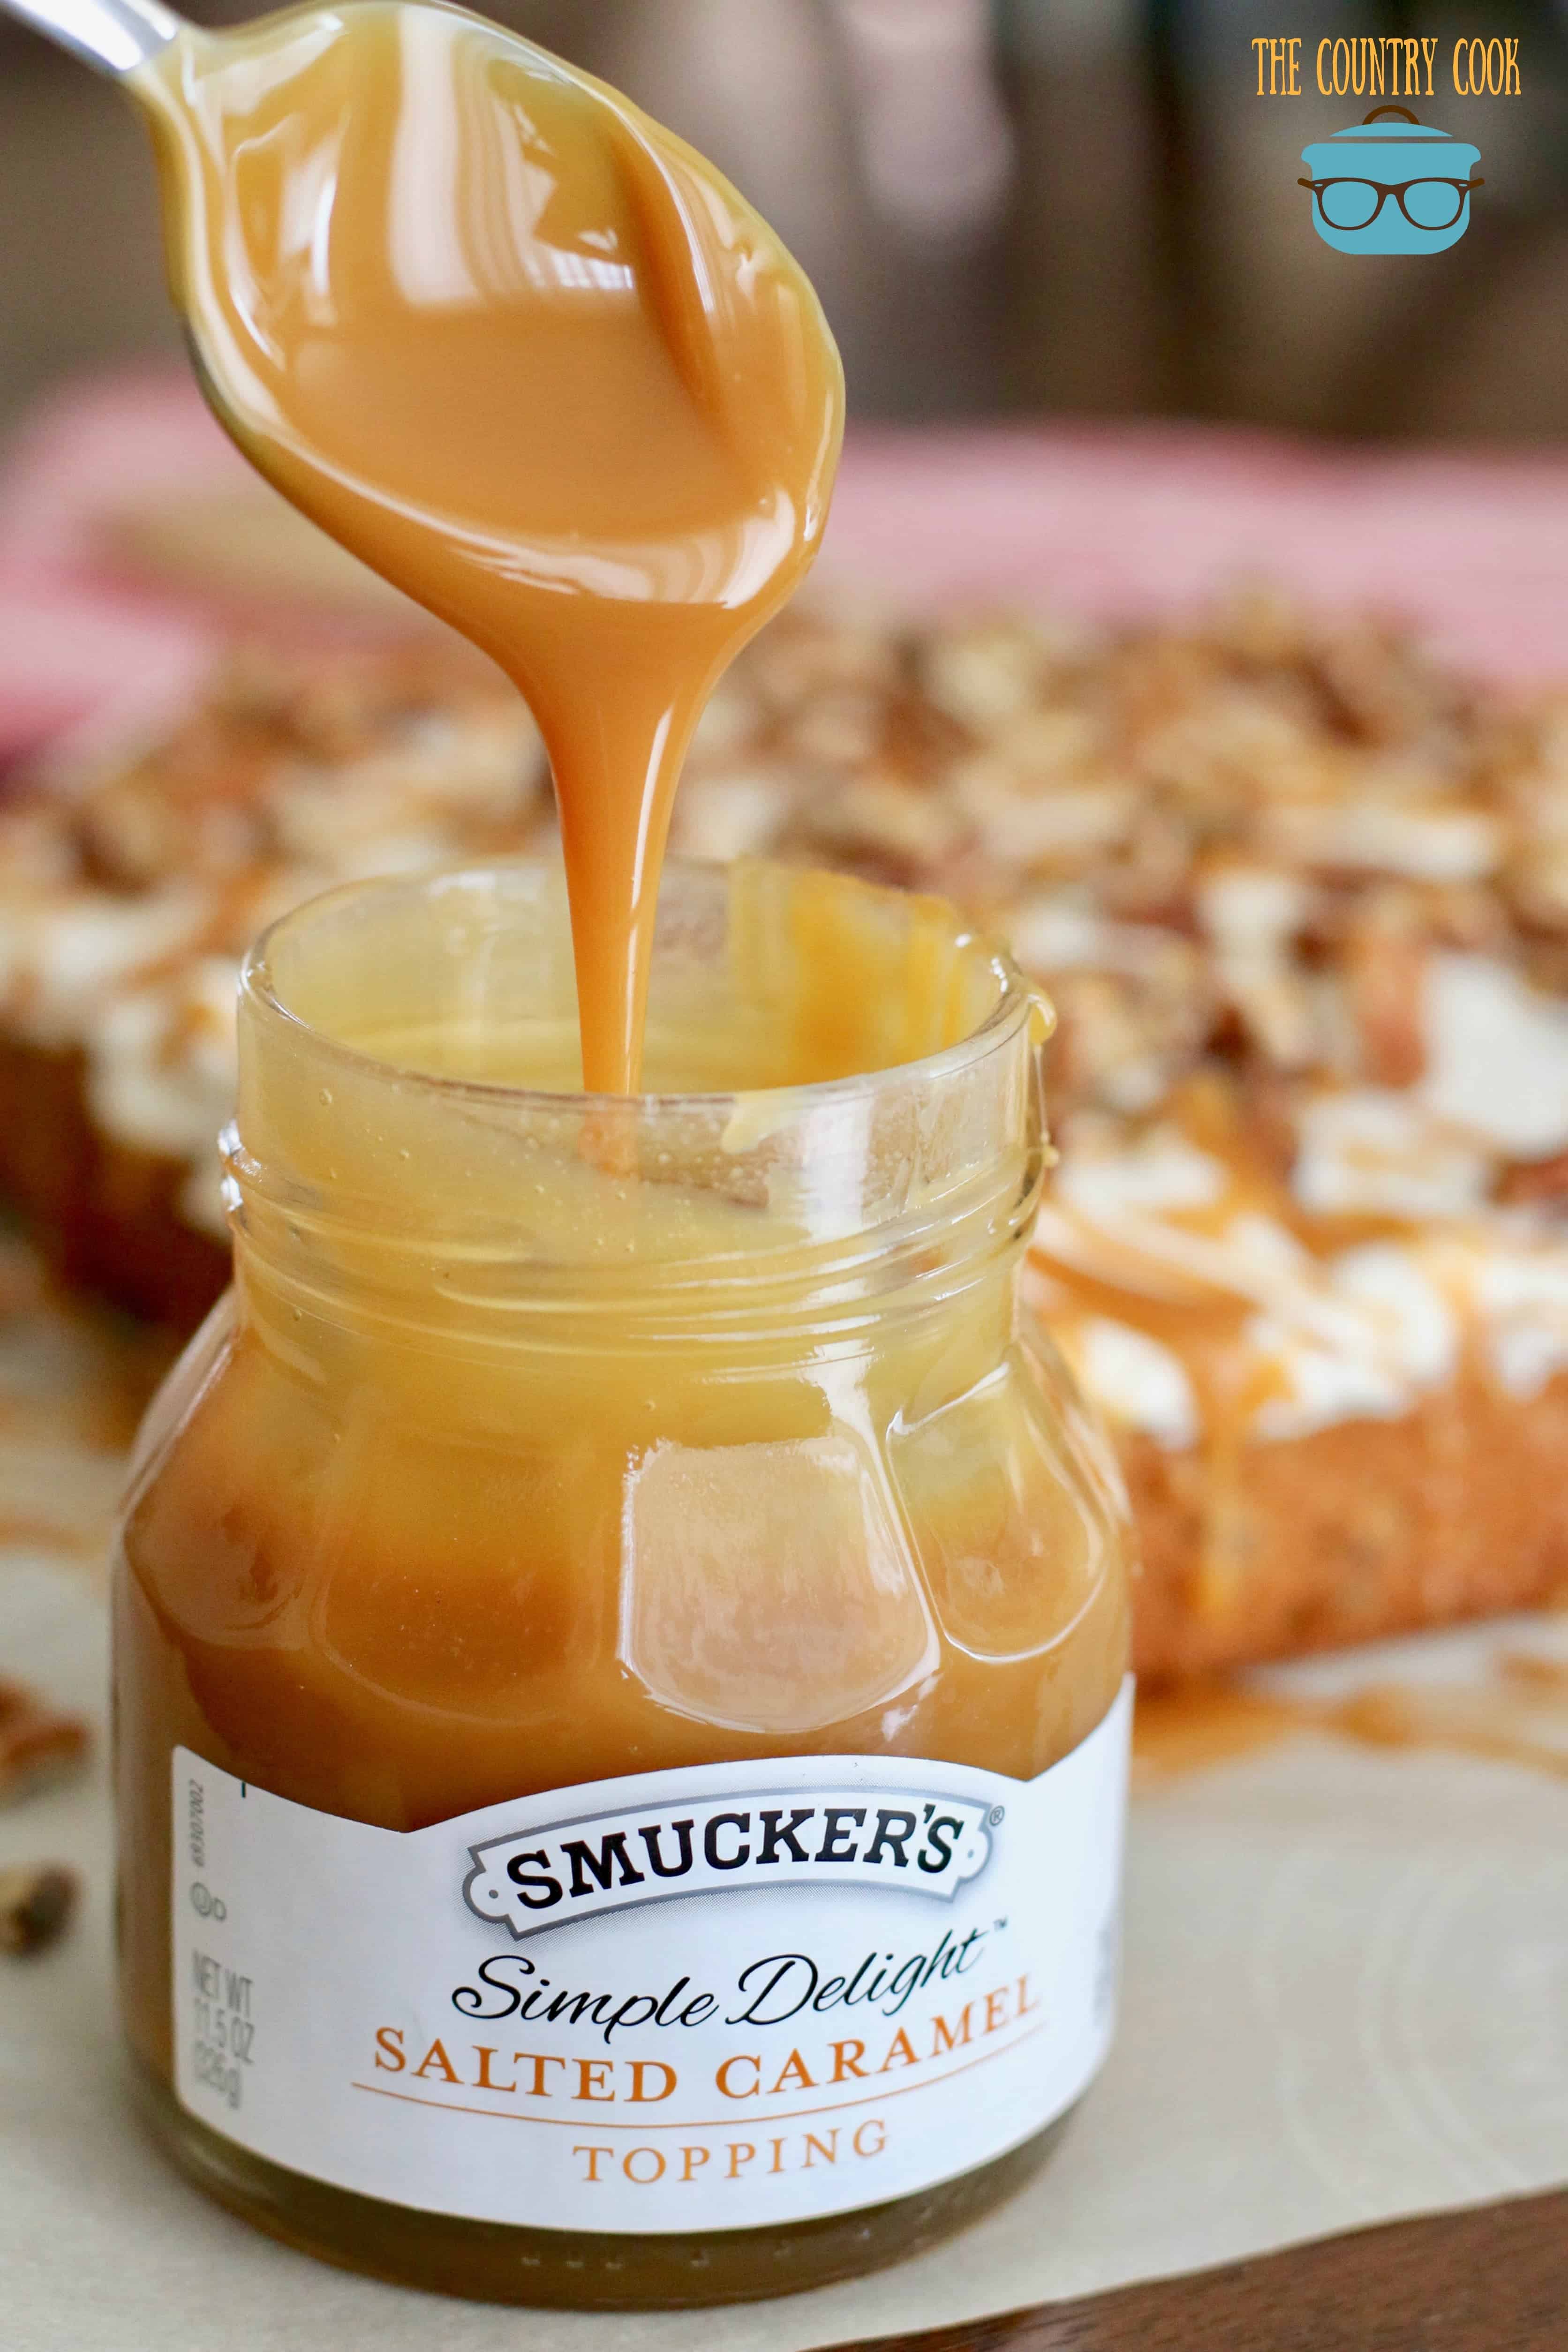 Smucker's Salted Caramel sauce being drizzled with a spoon.